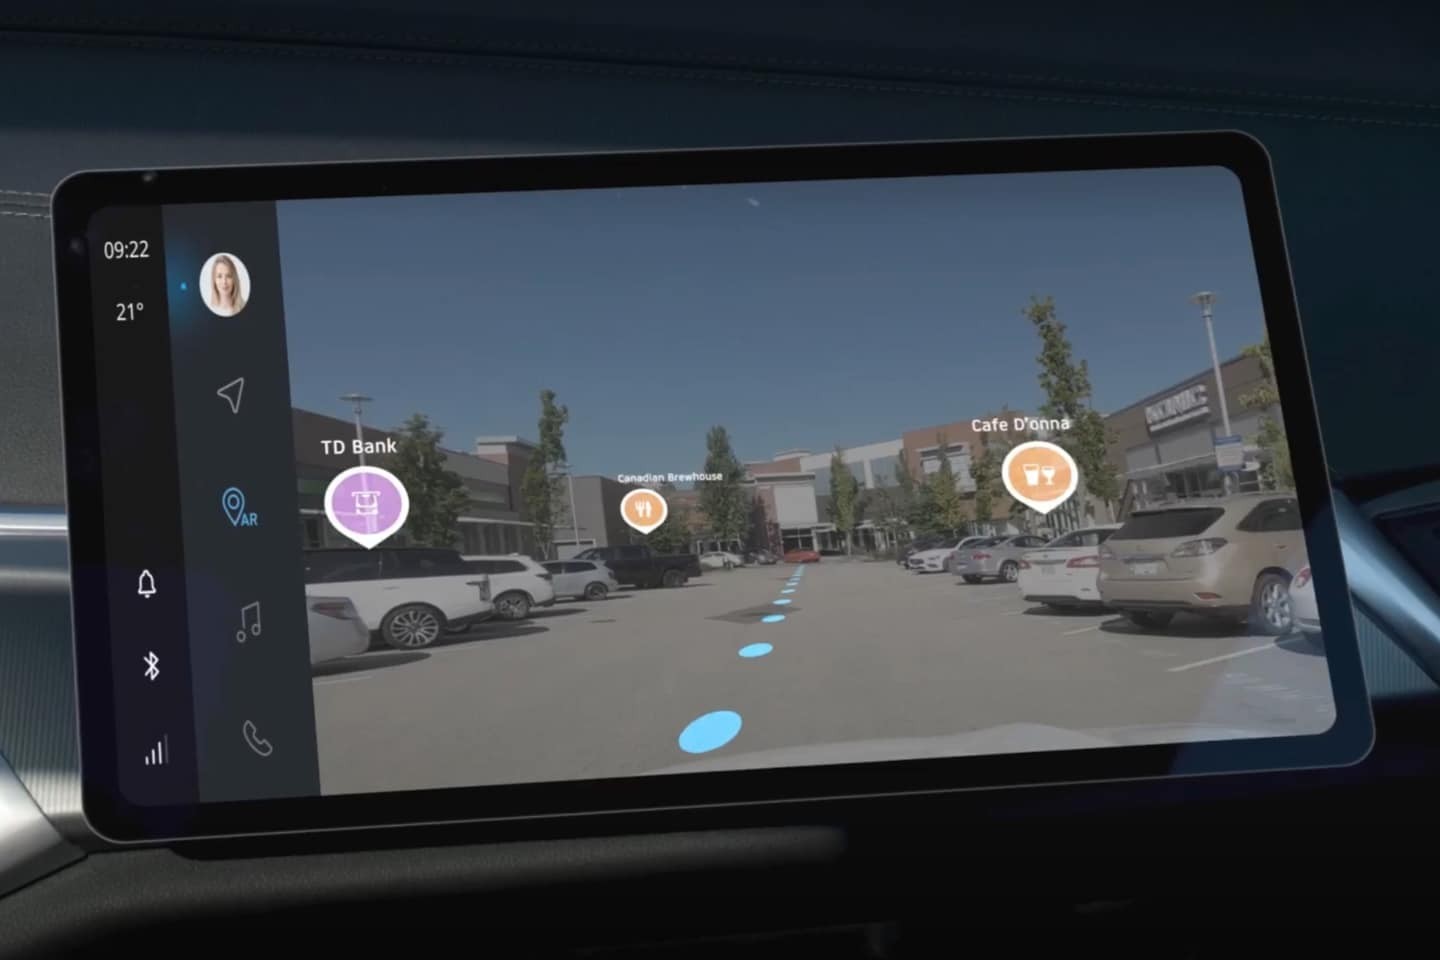 AR can display relevant information such as real-world POIs along the route, which the driver might otherwise miss.